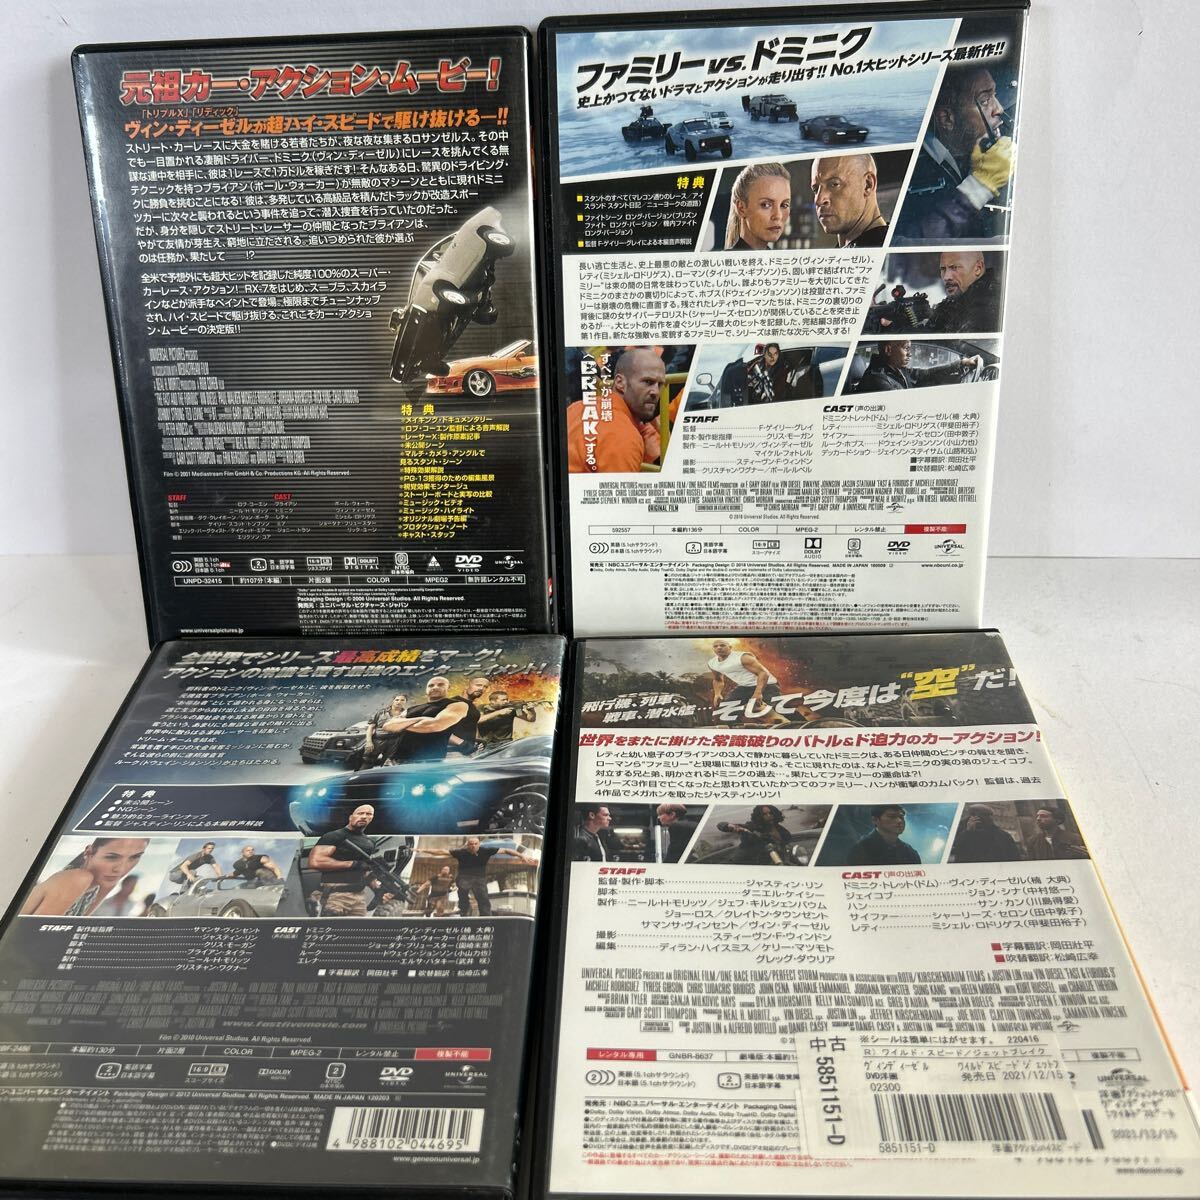  used DVD Blu-ray The Fast and The Furious FAST&FURIOUS jet break Sky mission mega Max ice break [KMDV-041009]